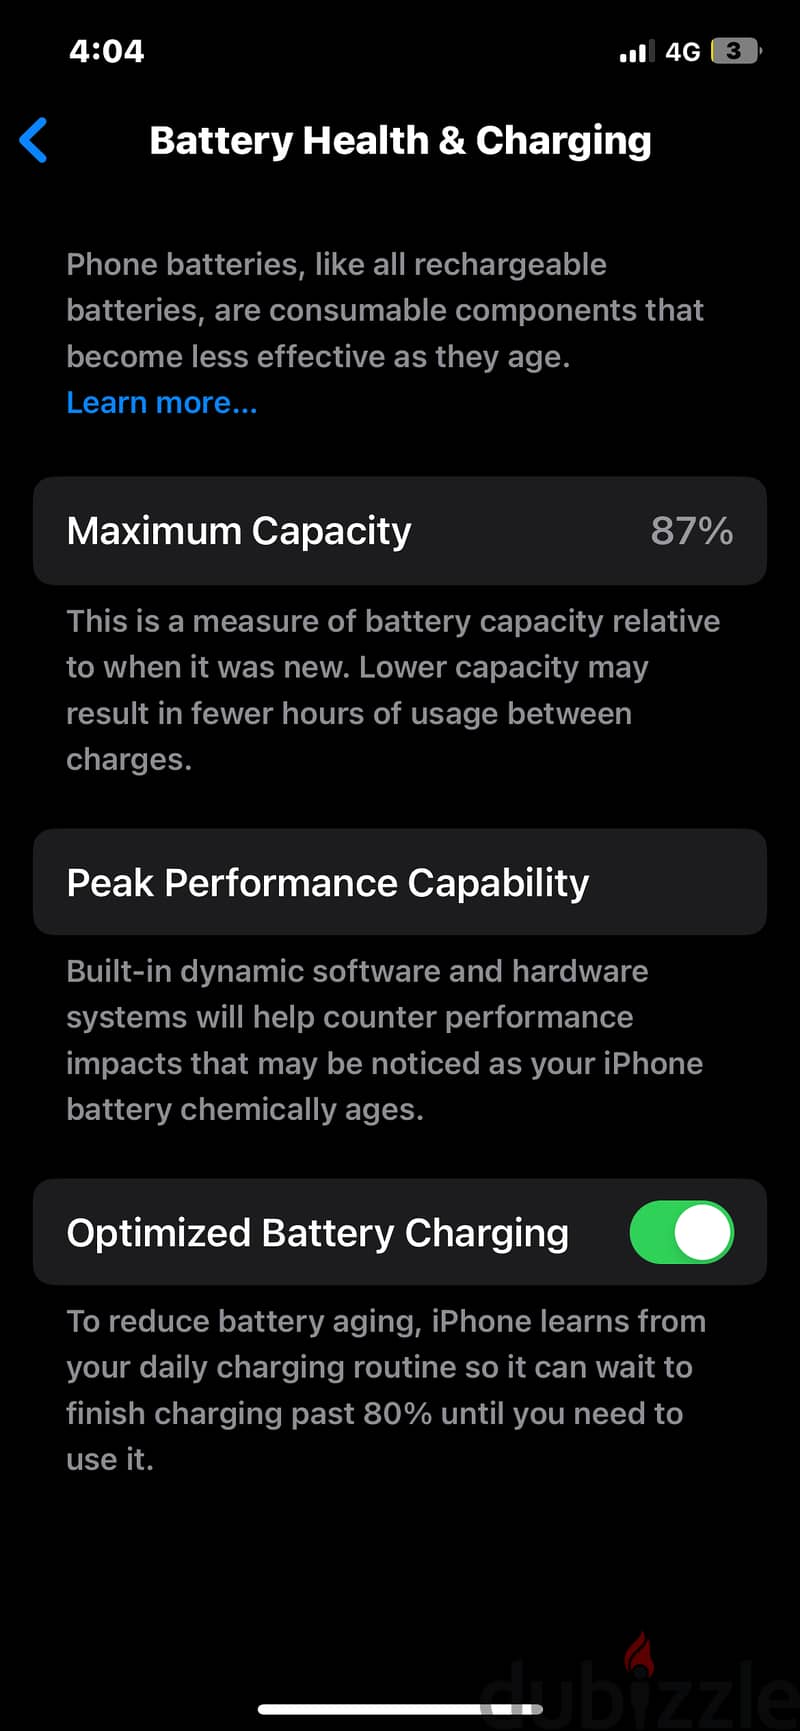 Iphone12 pro battery health 87% 7